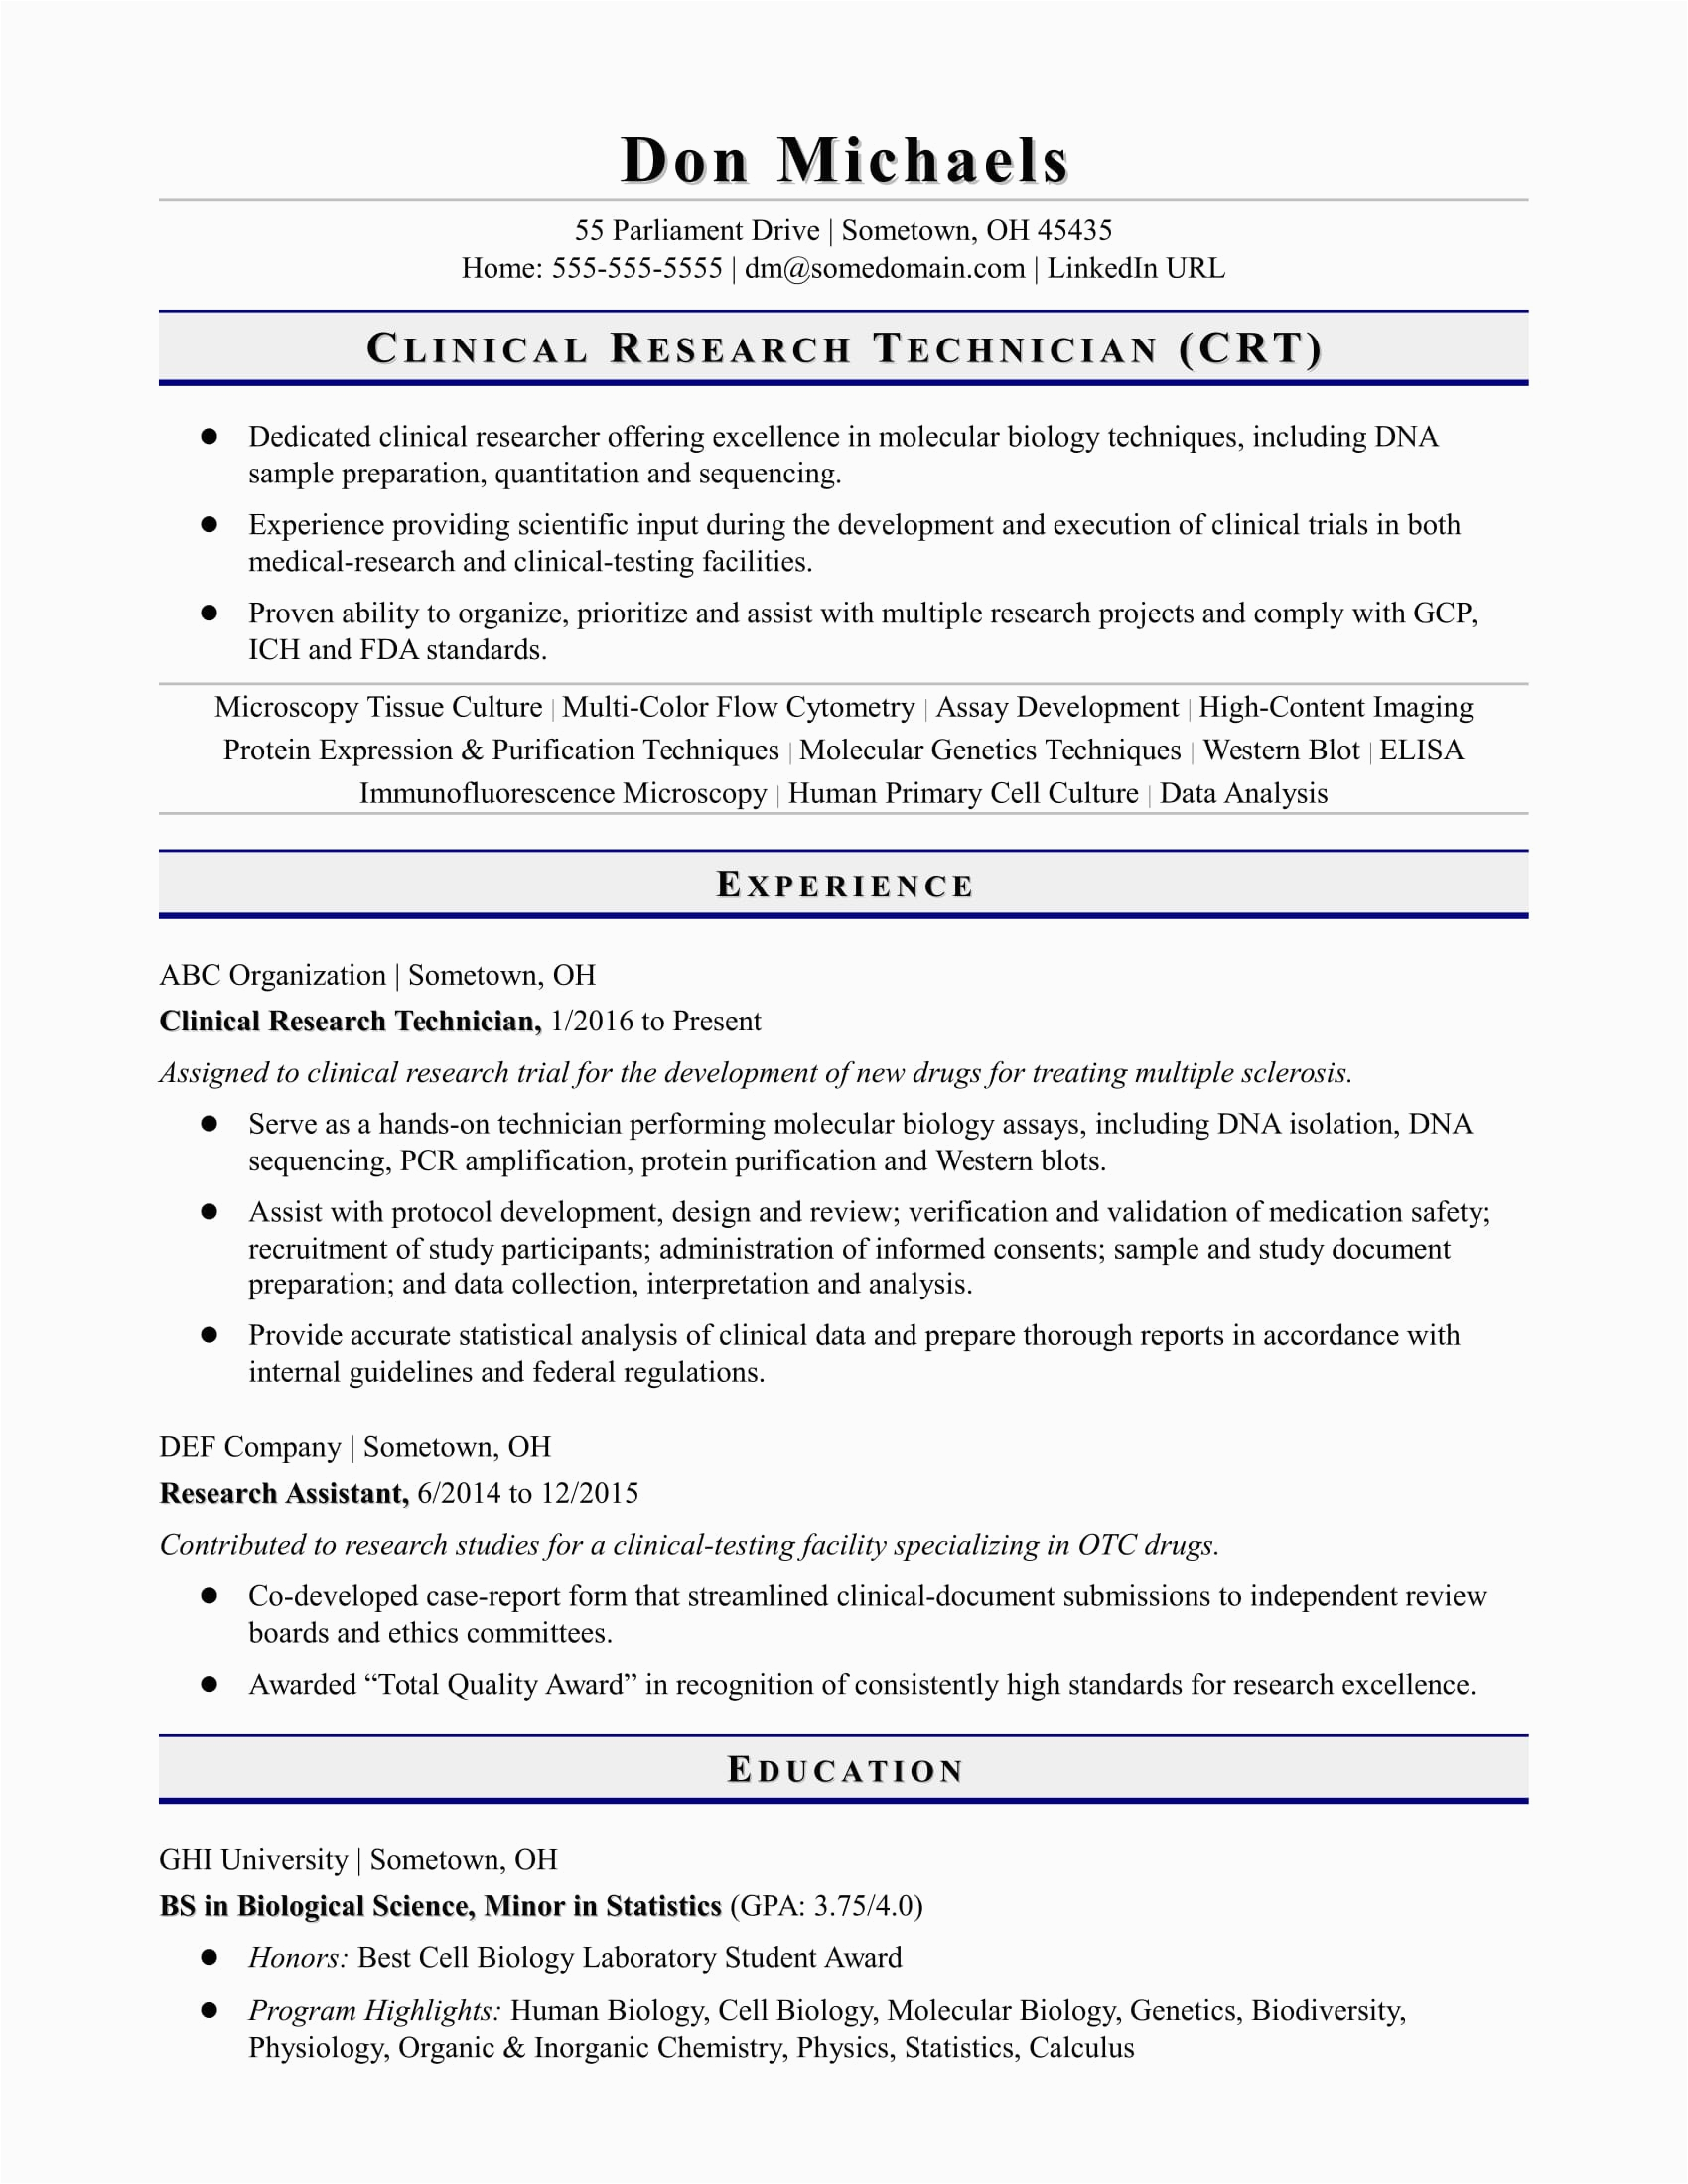 Resume Samples for A Tech Position Entry Level Research Technician Resume Sample